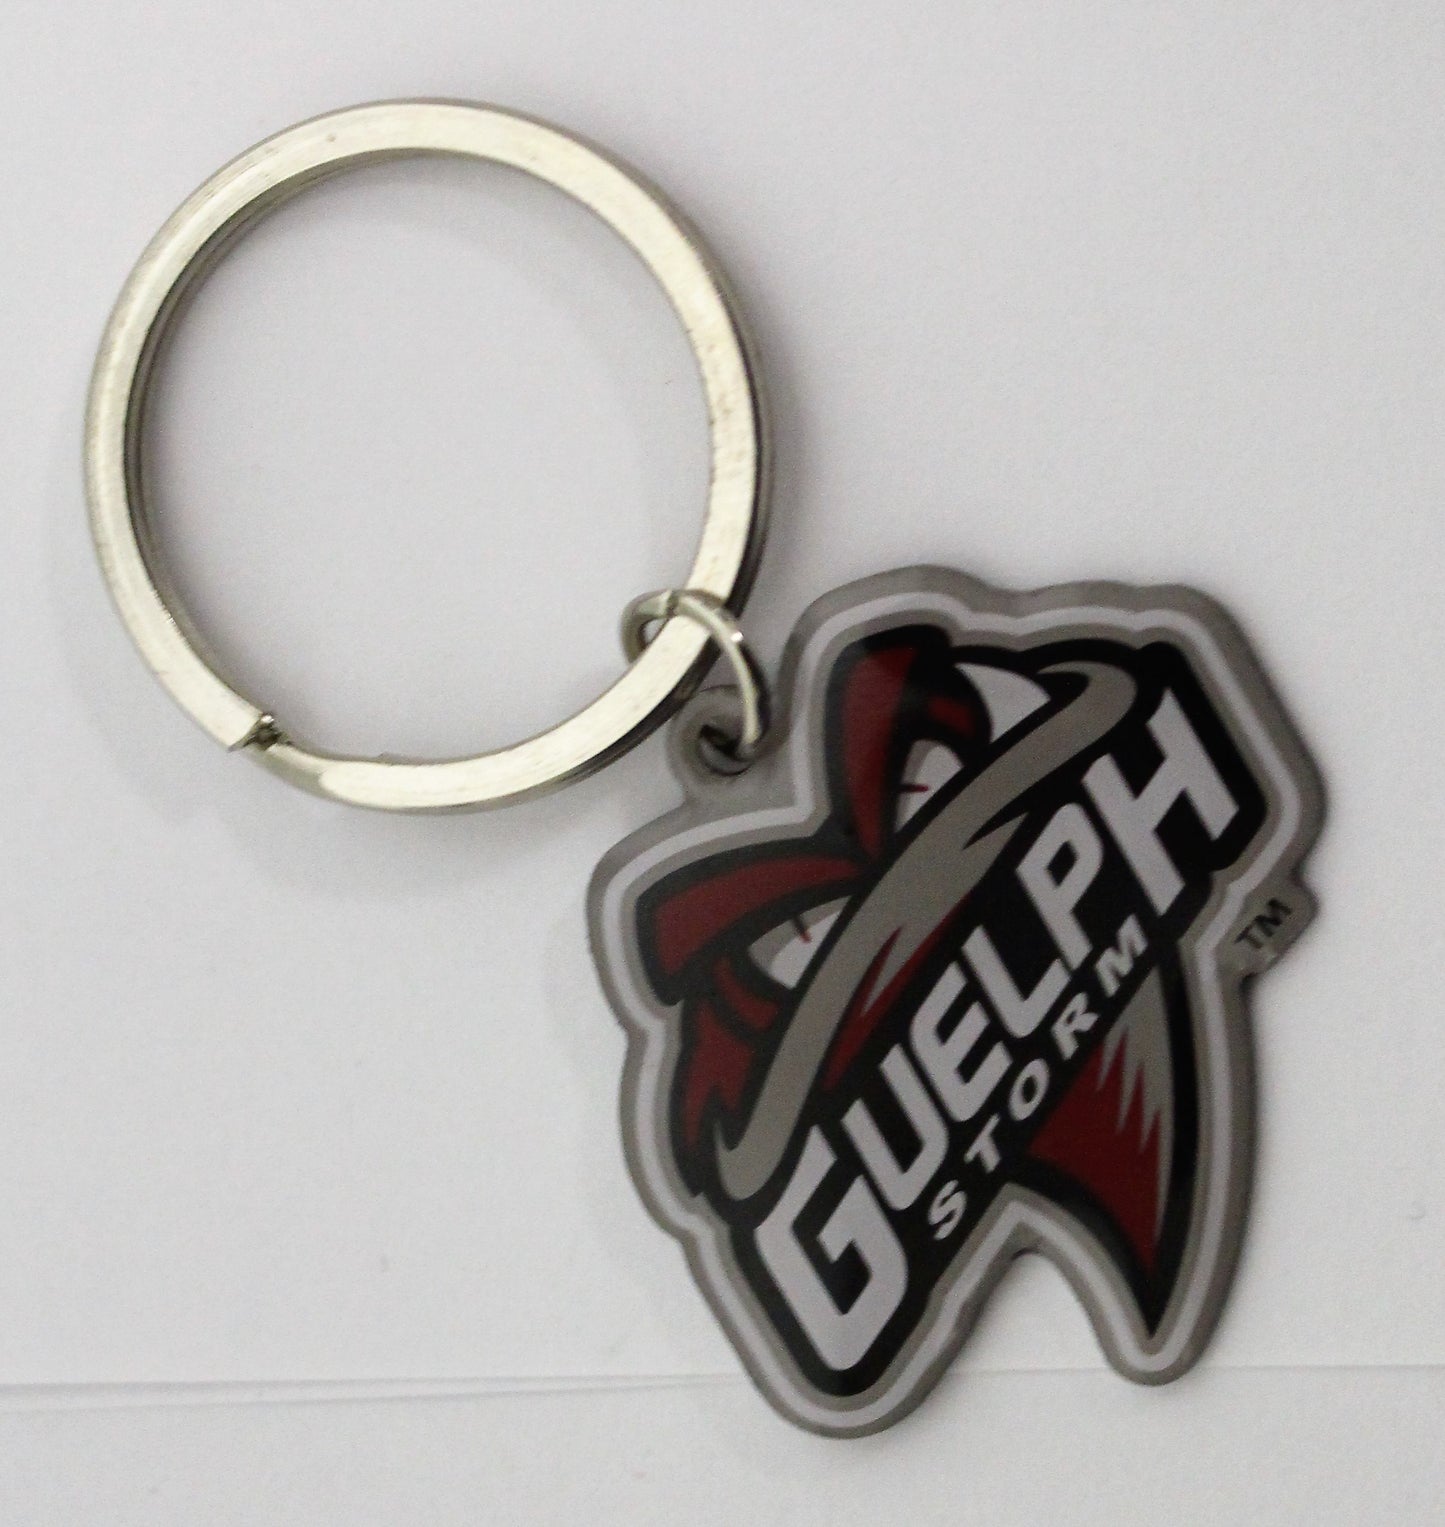 Guelph Storm Key Chain